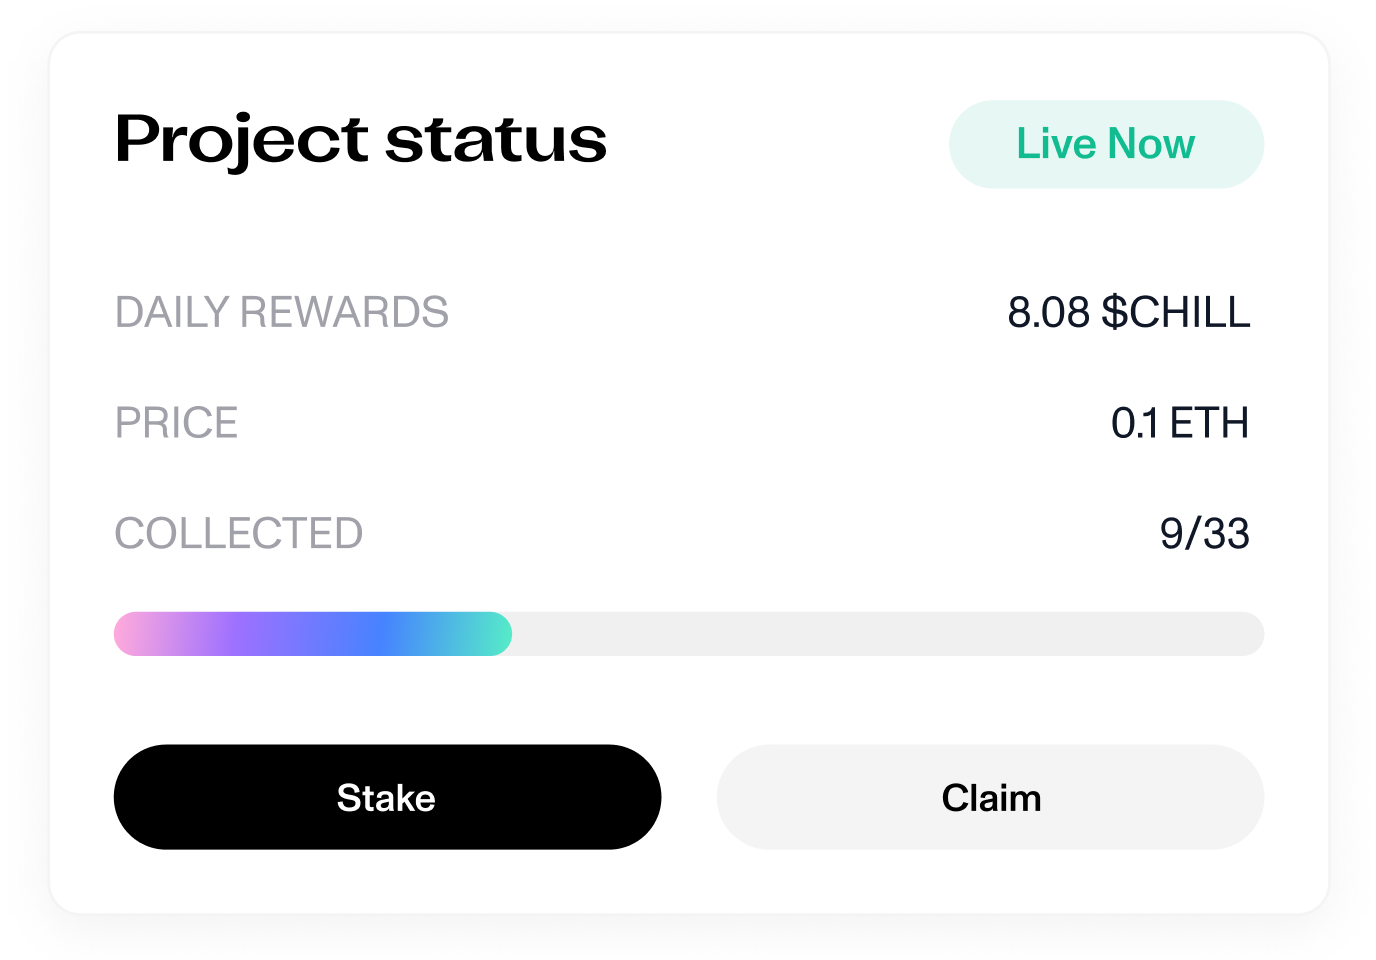 Easily stake and claim accrued rewards on the Decent collection pages.